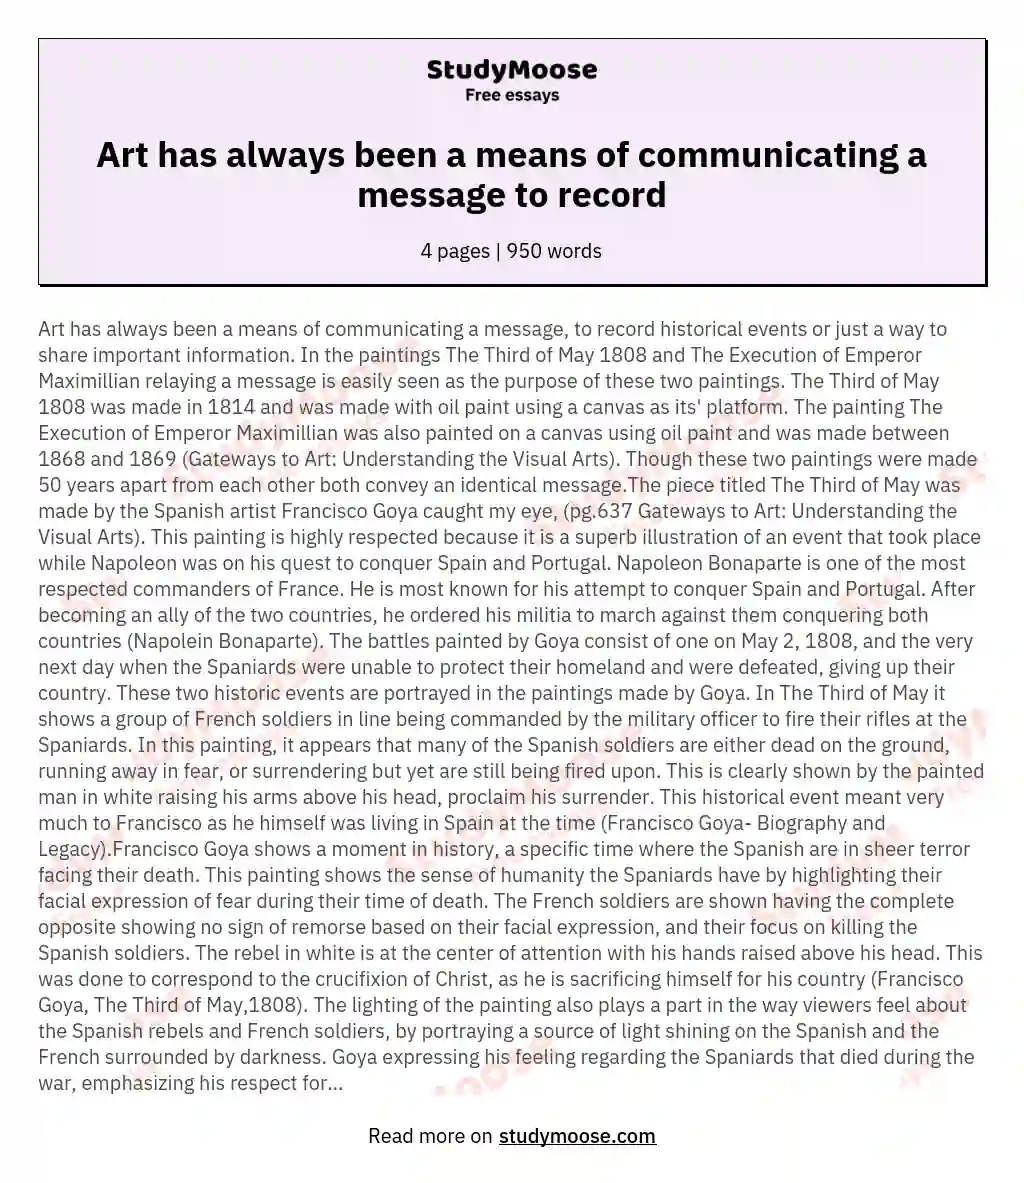 Art has always been a means of communicating a message to record essay